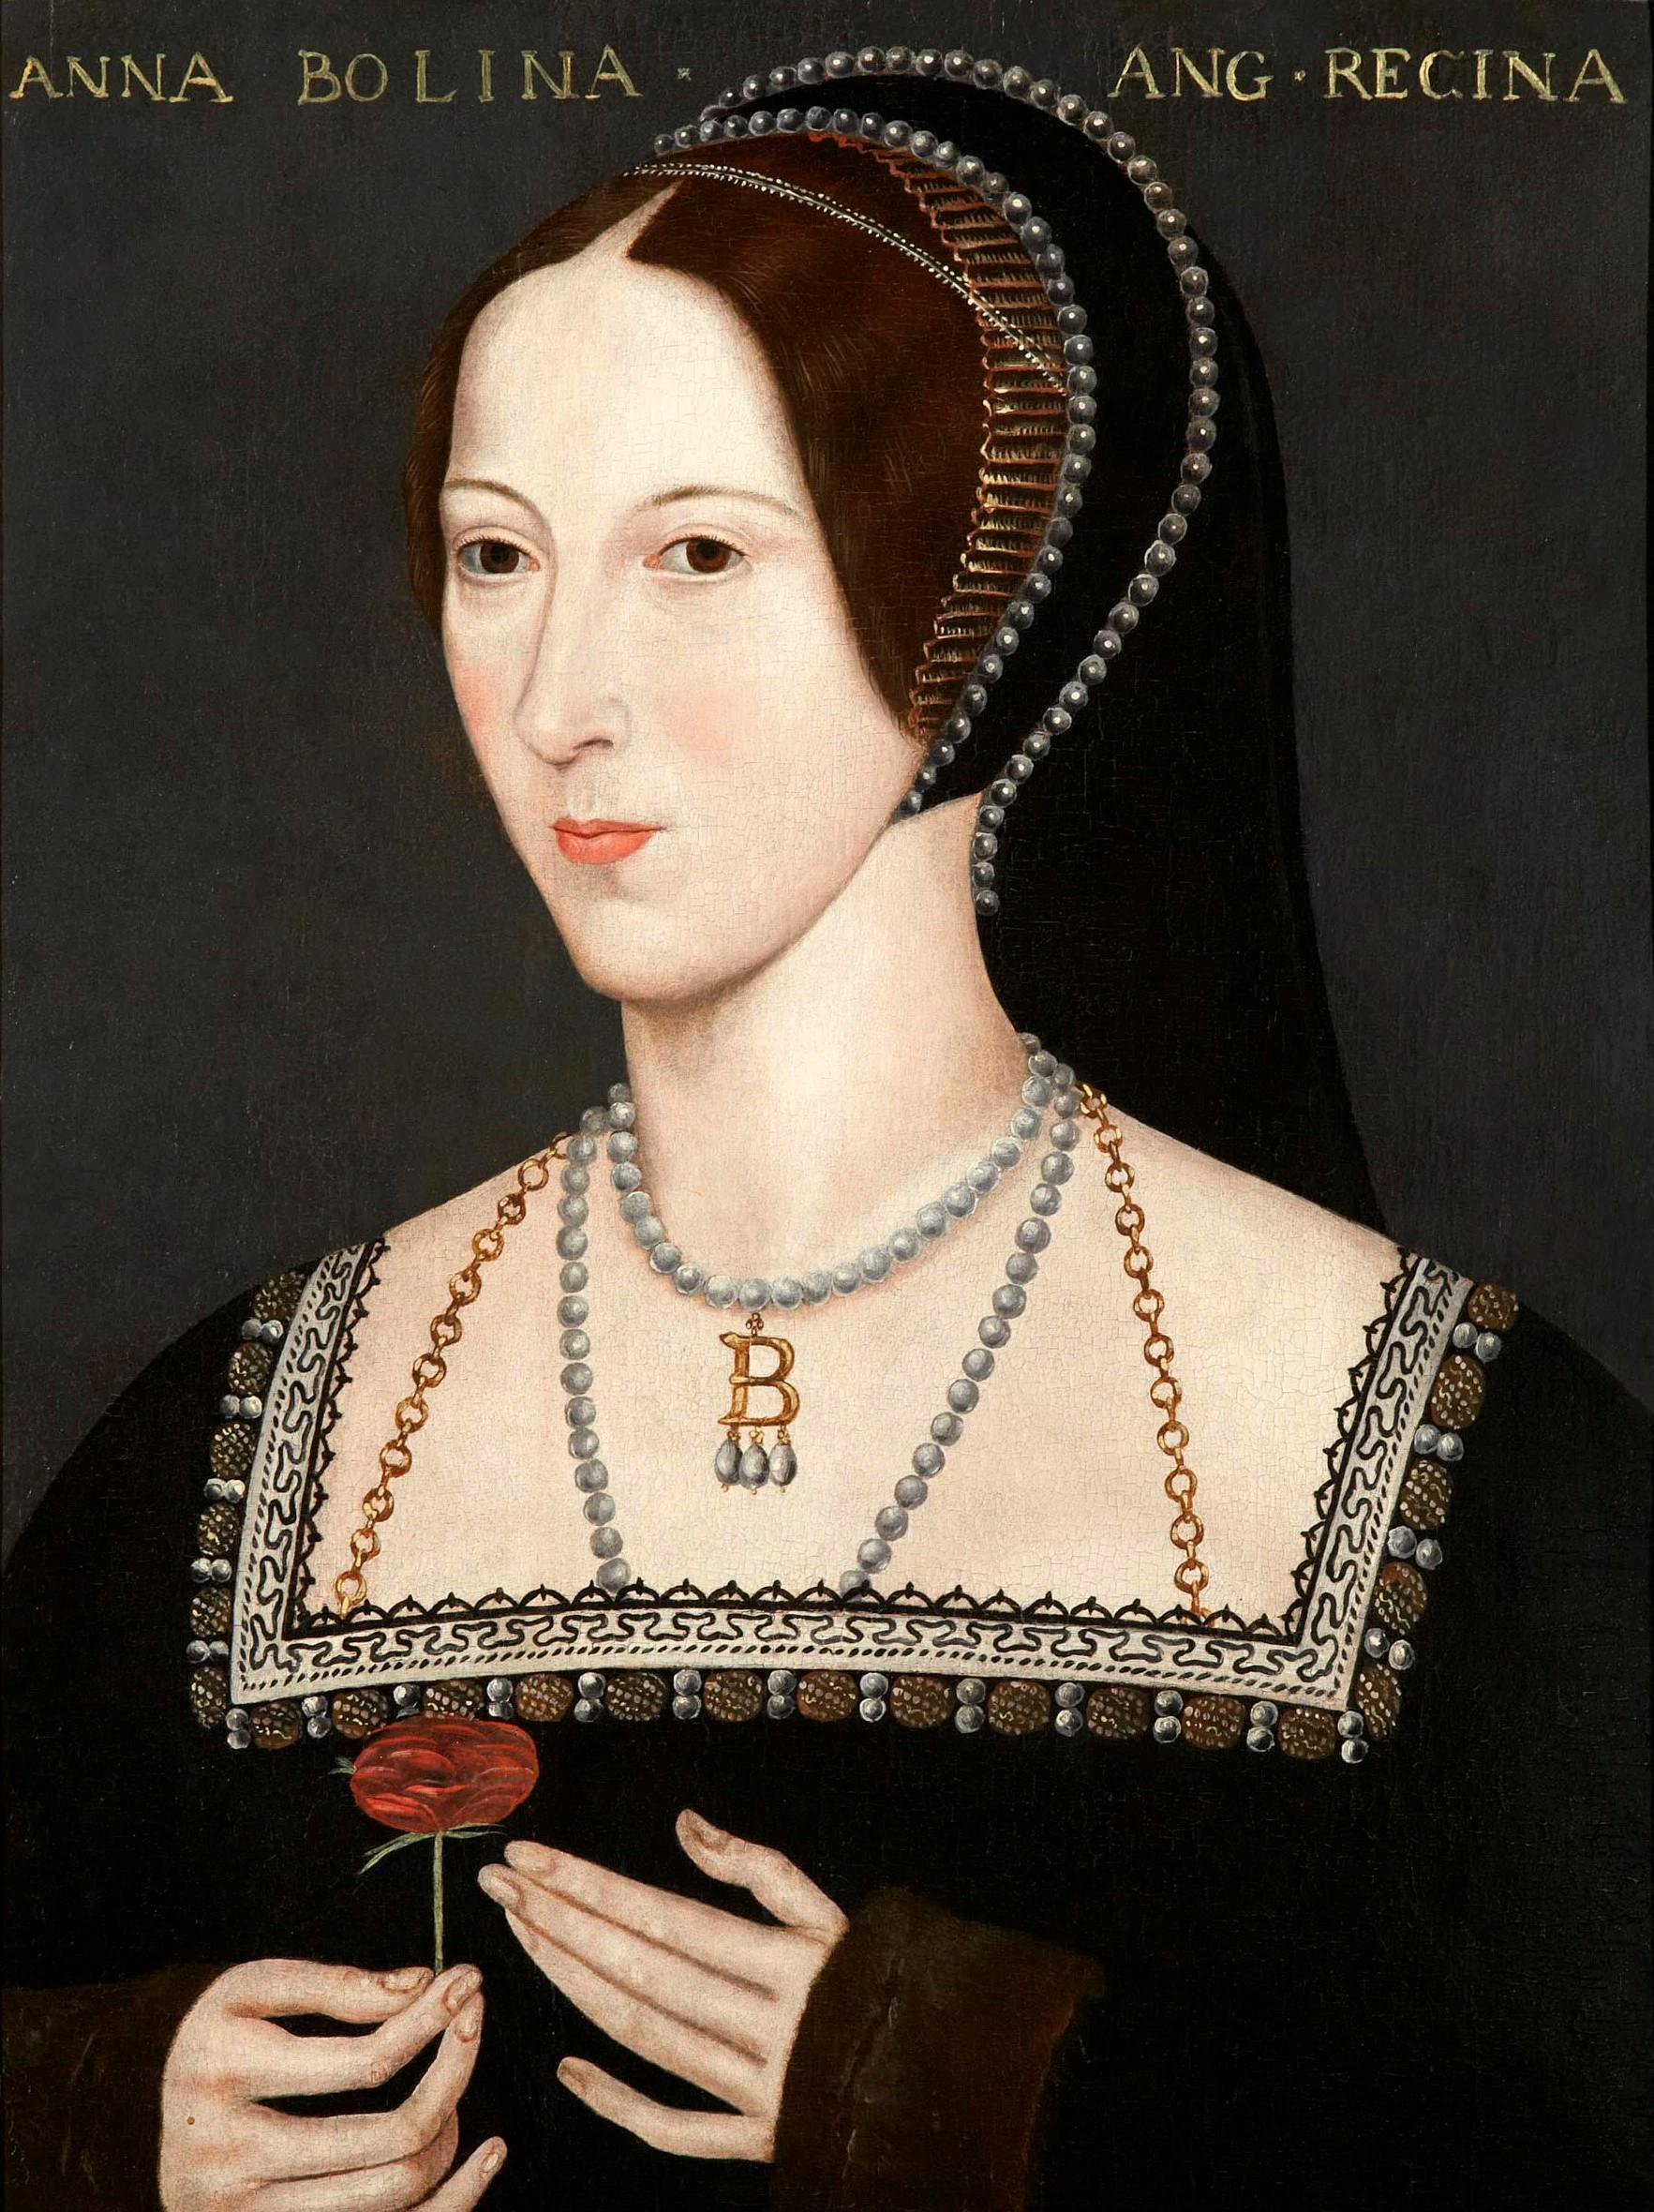 Near contemporary painting of Anne Boleyn at Hever Castle, c. 1550. Public Domain/Wikimedia Commons